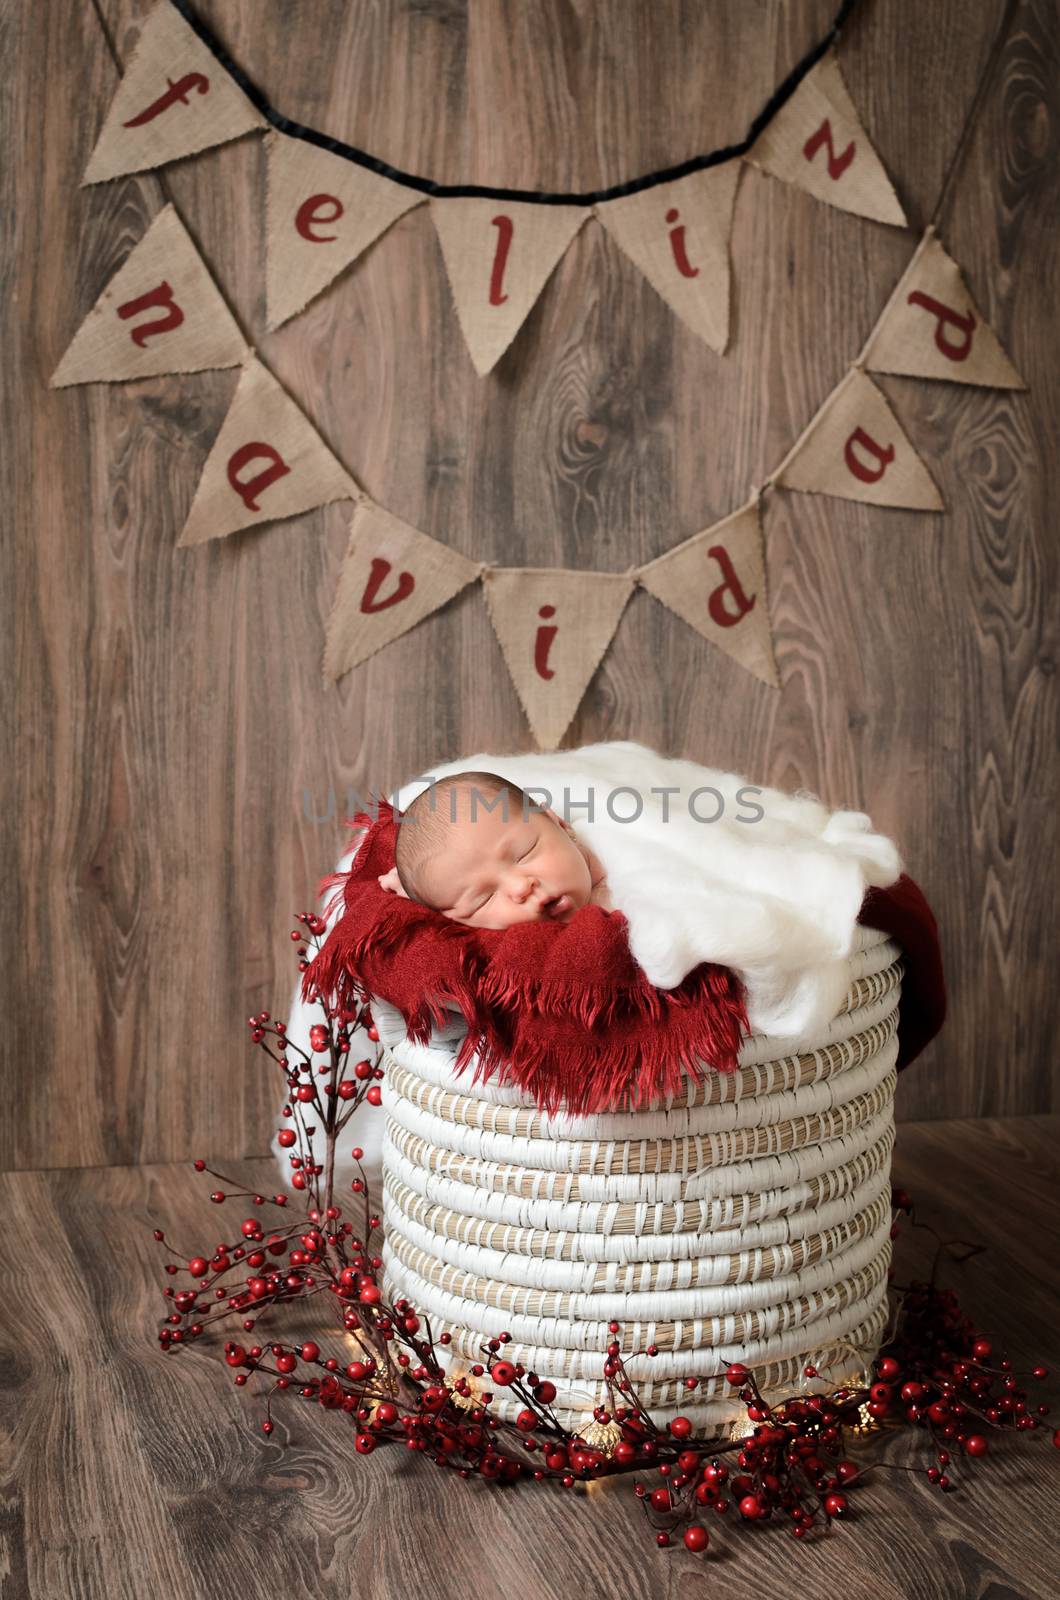 Lovely baby sleeping on a basket with brown, wooden background and Merry Christmas letters.